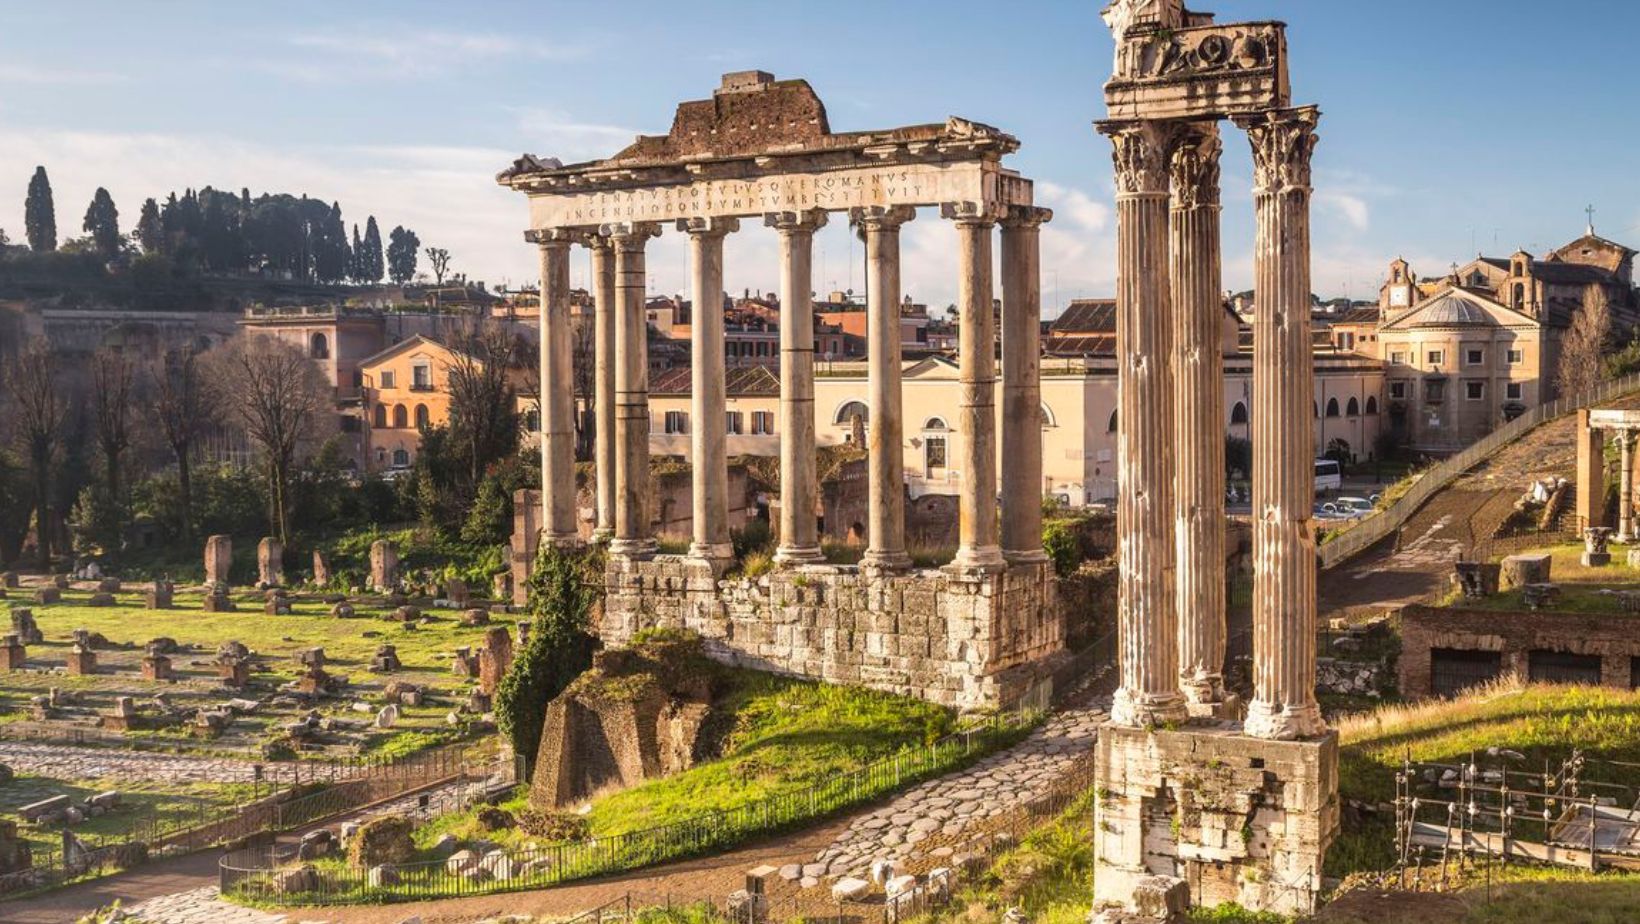 What Caused the decline of the Roman Empire?